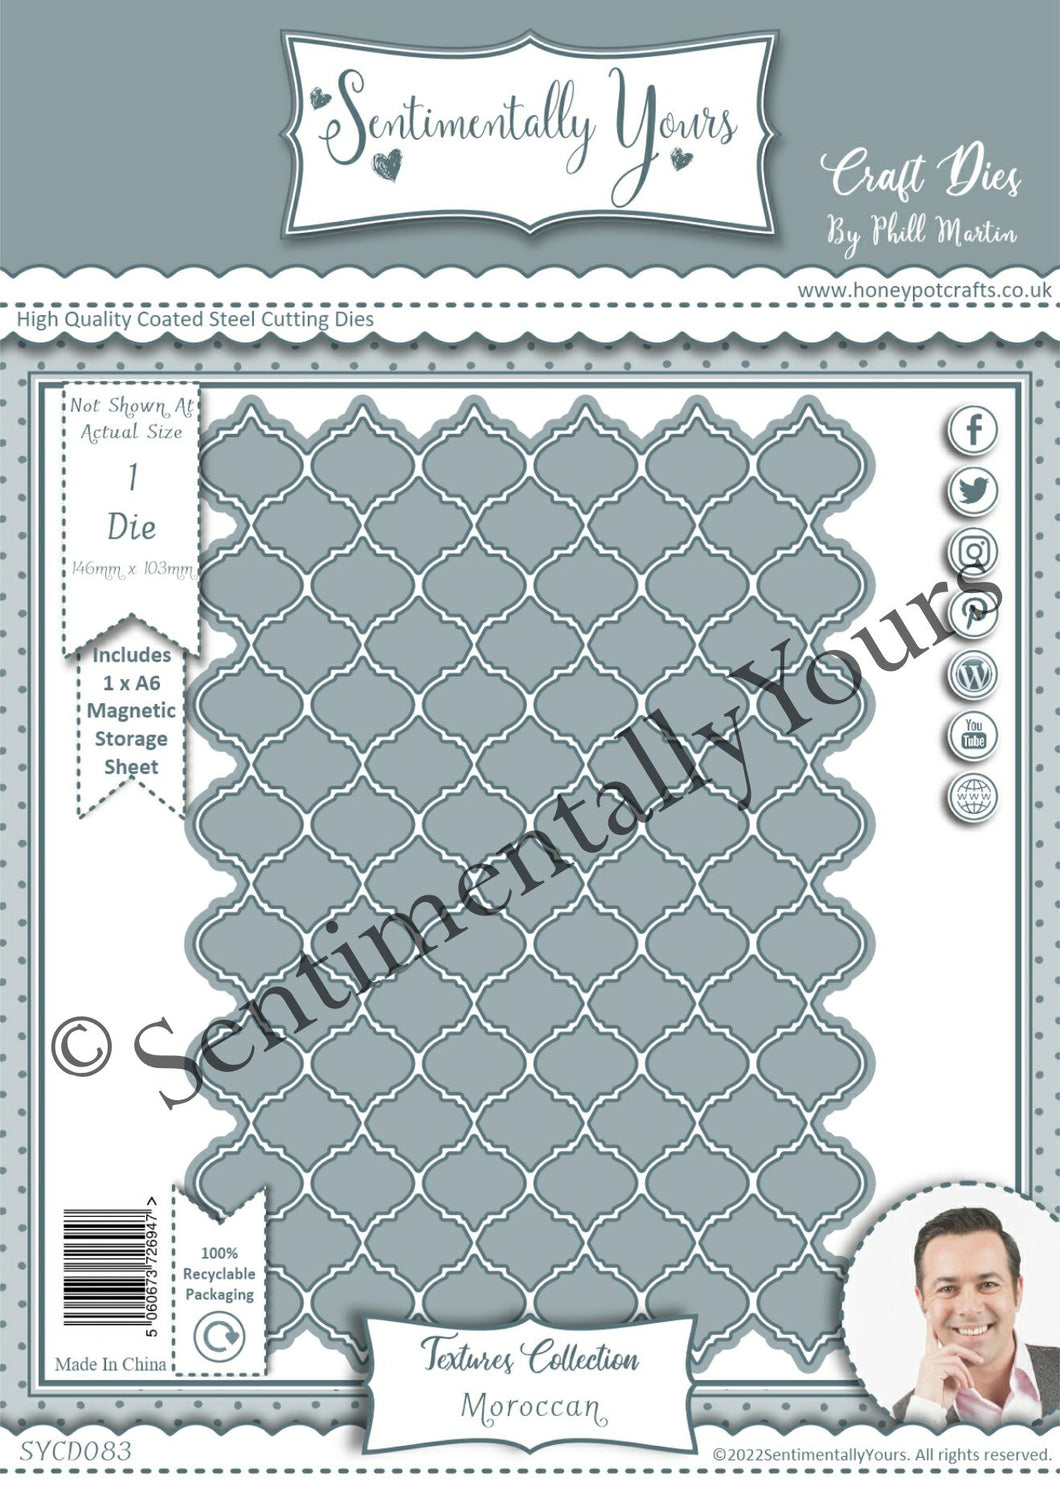 Phill Martin Sentimentally Yours Textures Collection - A6 Moroccan Die